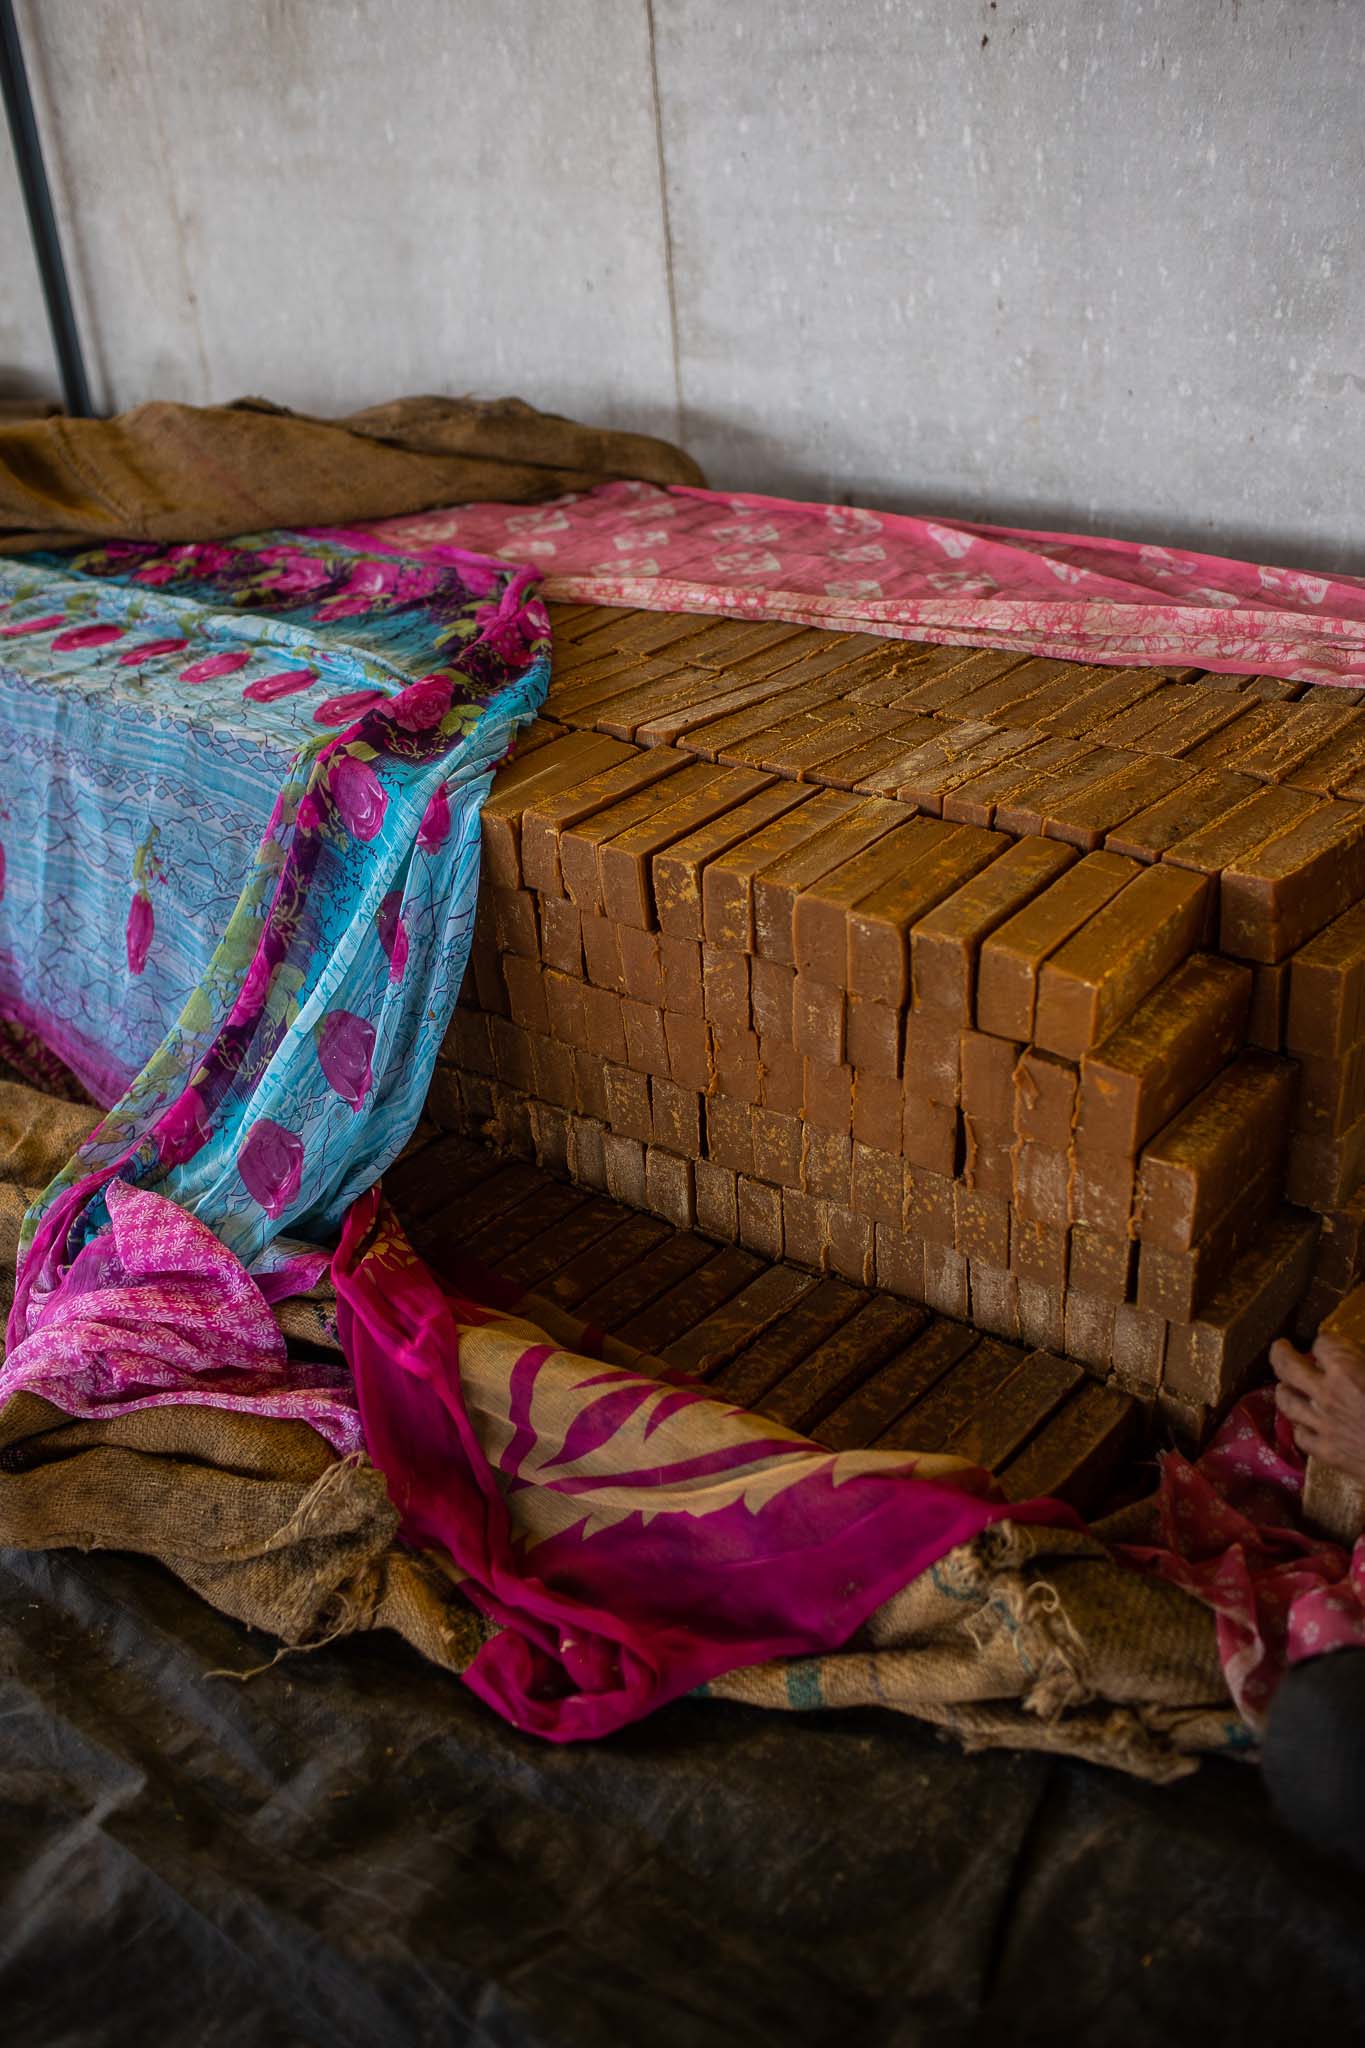 Blocks of jaggery stacked on the ground, draped with colorful cloth.